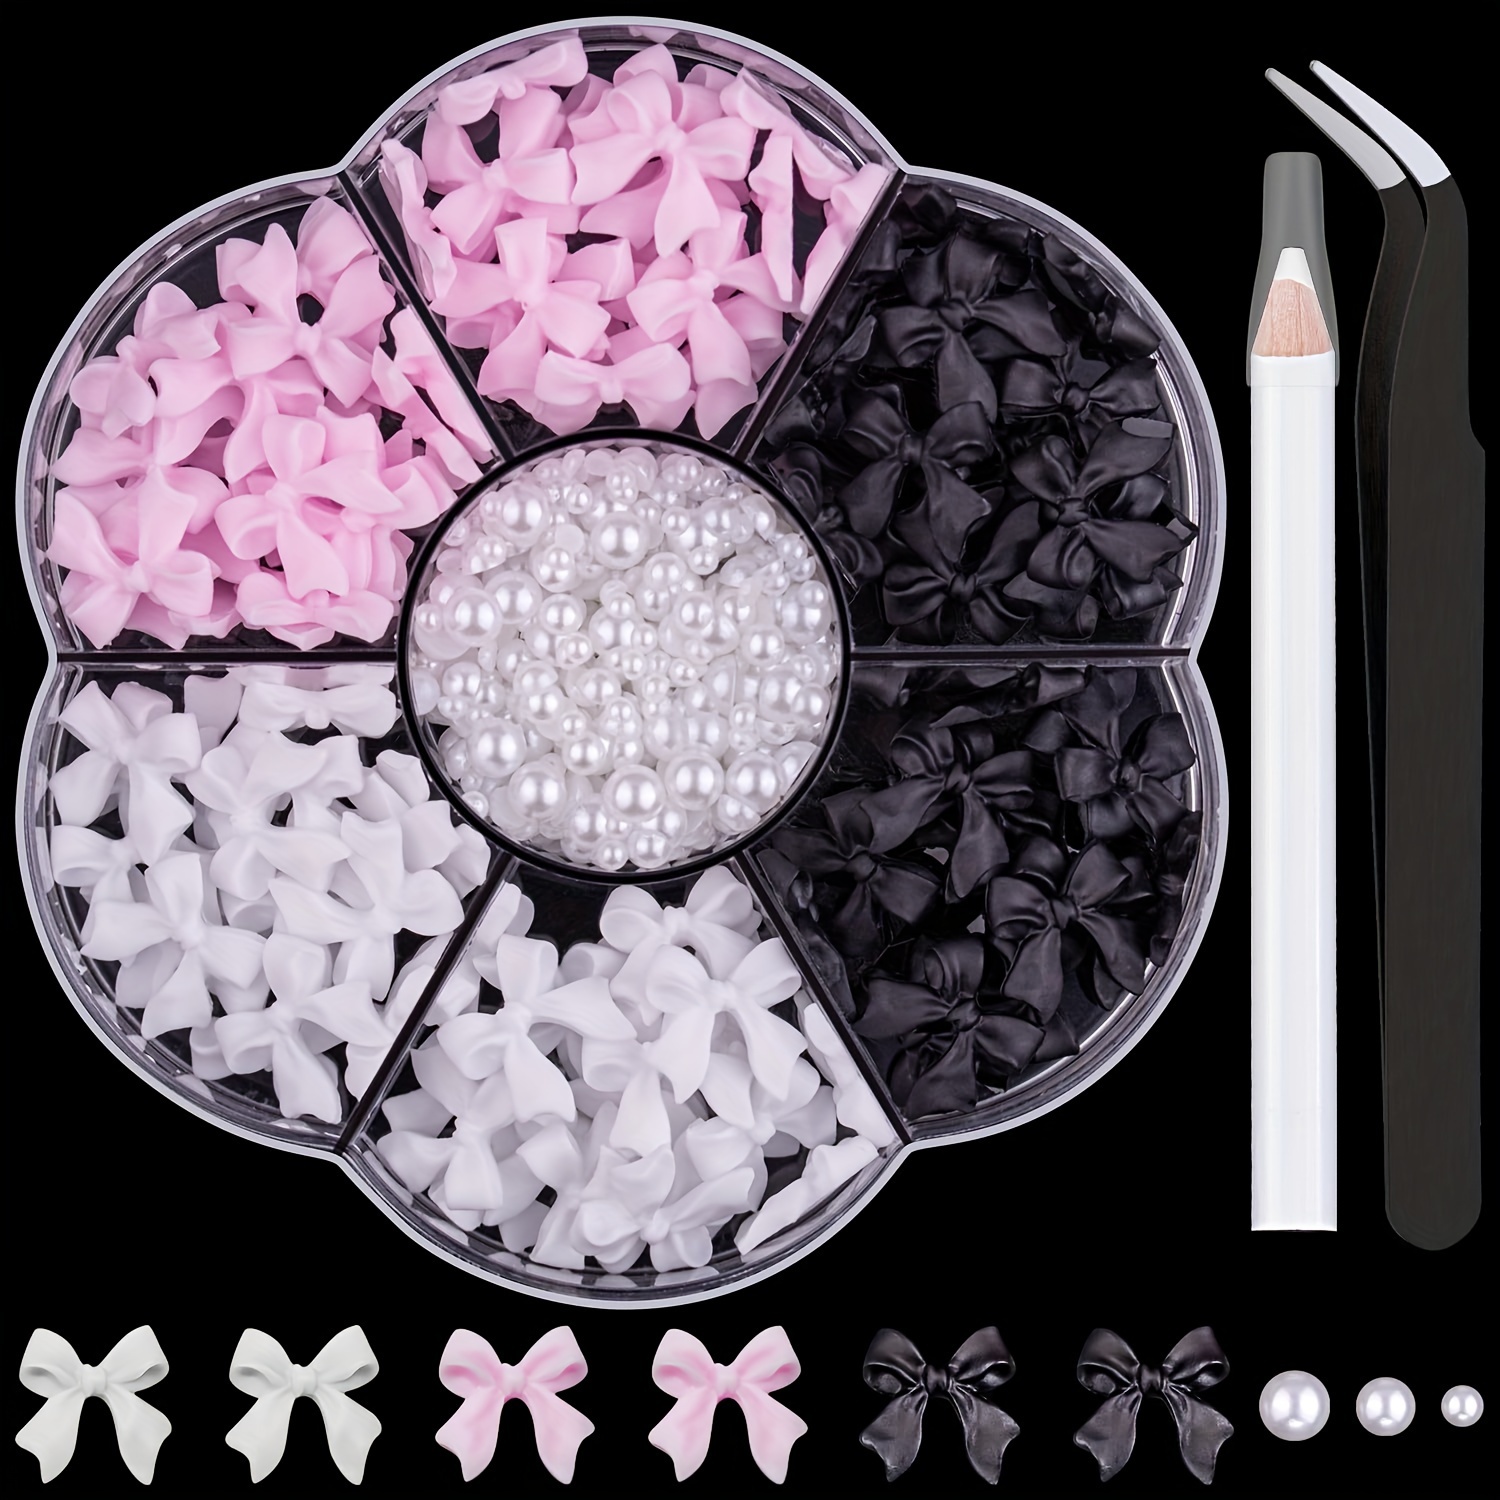 

1 Box 3d Bow Nail Charms And Flatback Pearls Set 4, 120 Pcs Cute Bow Charms For Nail Design + 2-4mm White Nail Pearls With Pickup Tweezer And Pencil For Nail Art Decoration